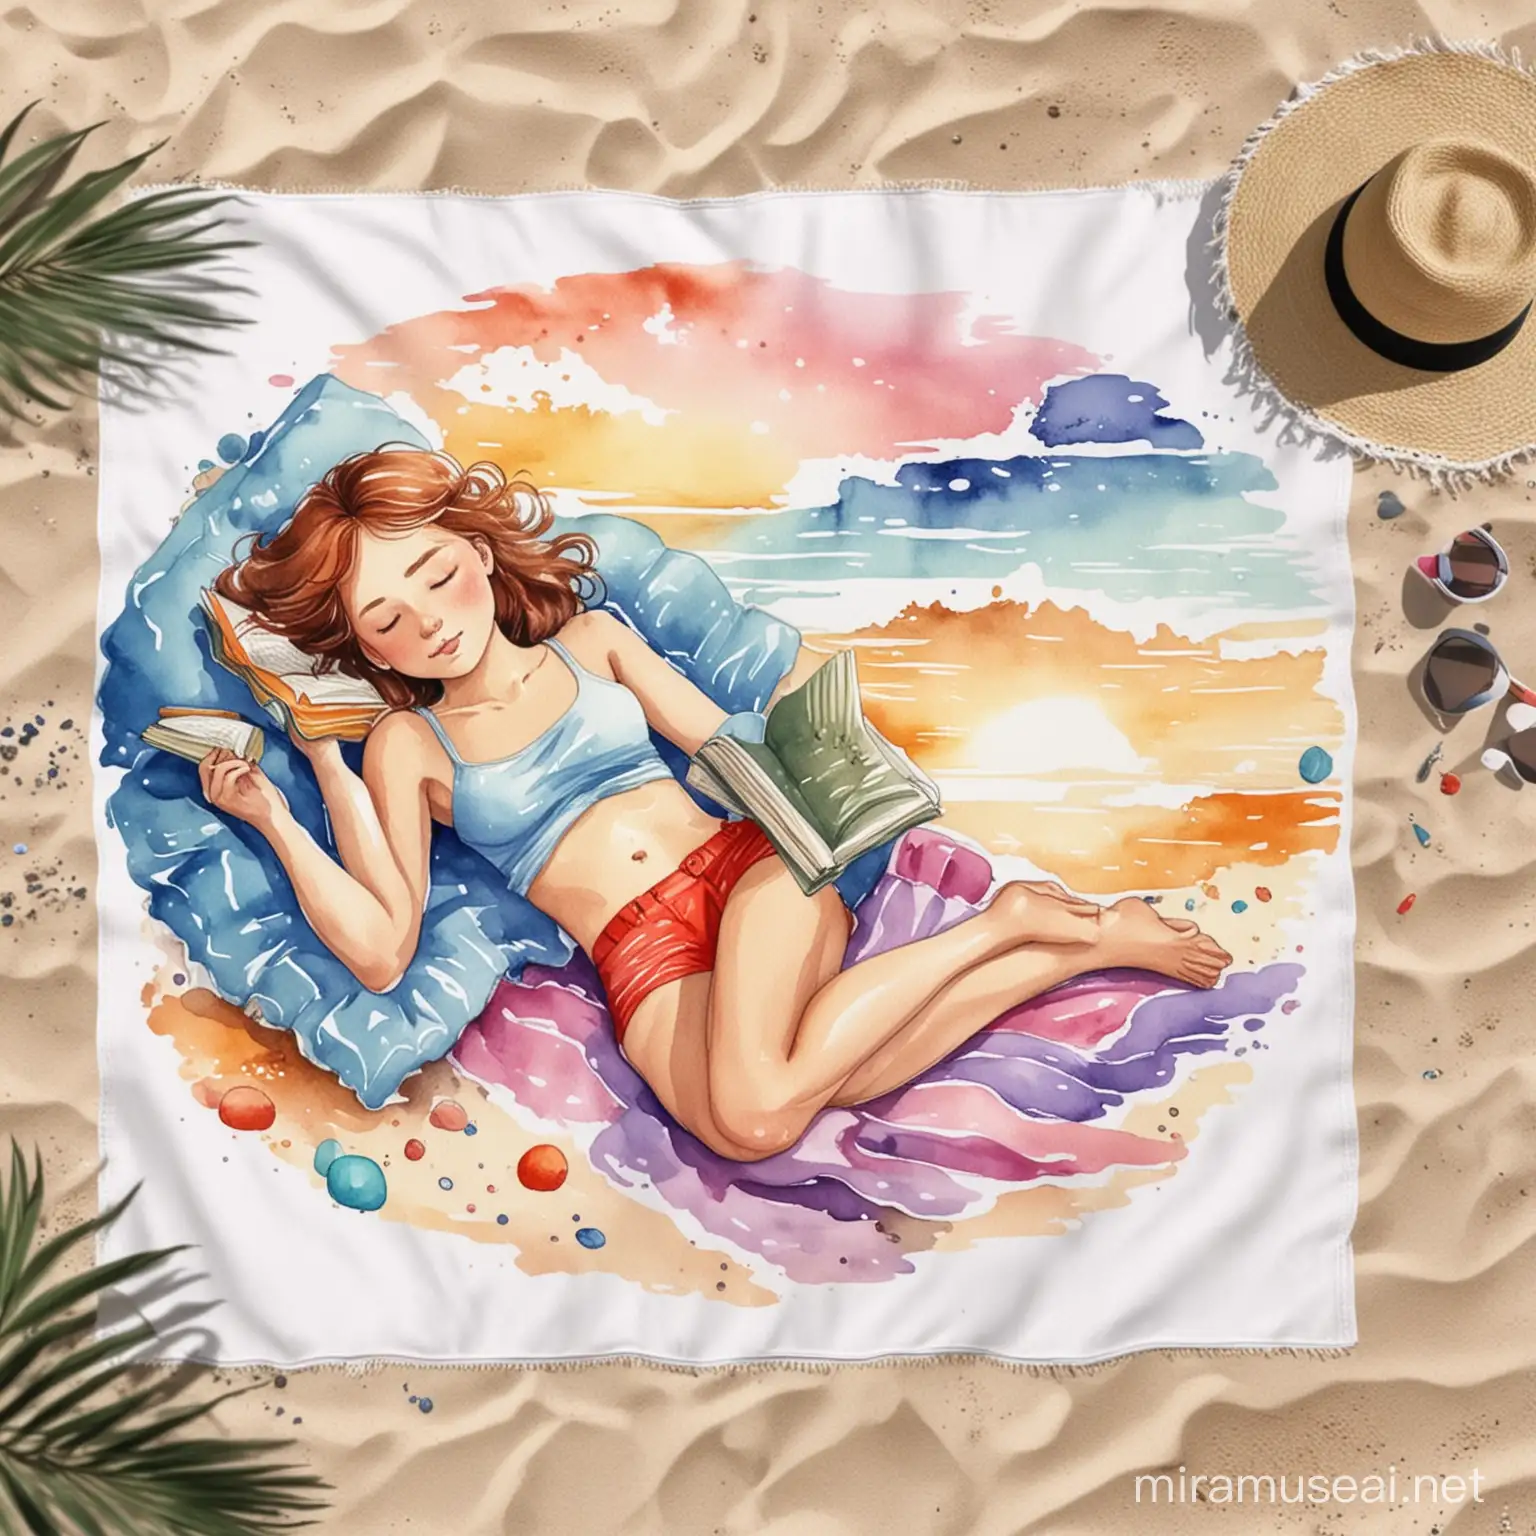 Girl Sleeping and Reading Book on Beach Towel Watercolor Paint Sticker Art